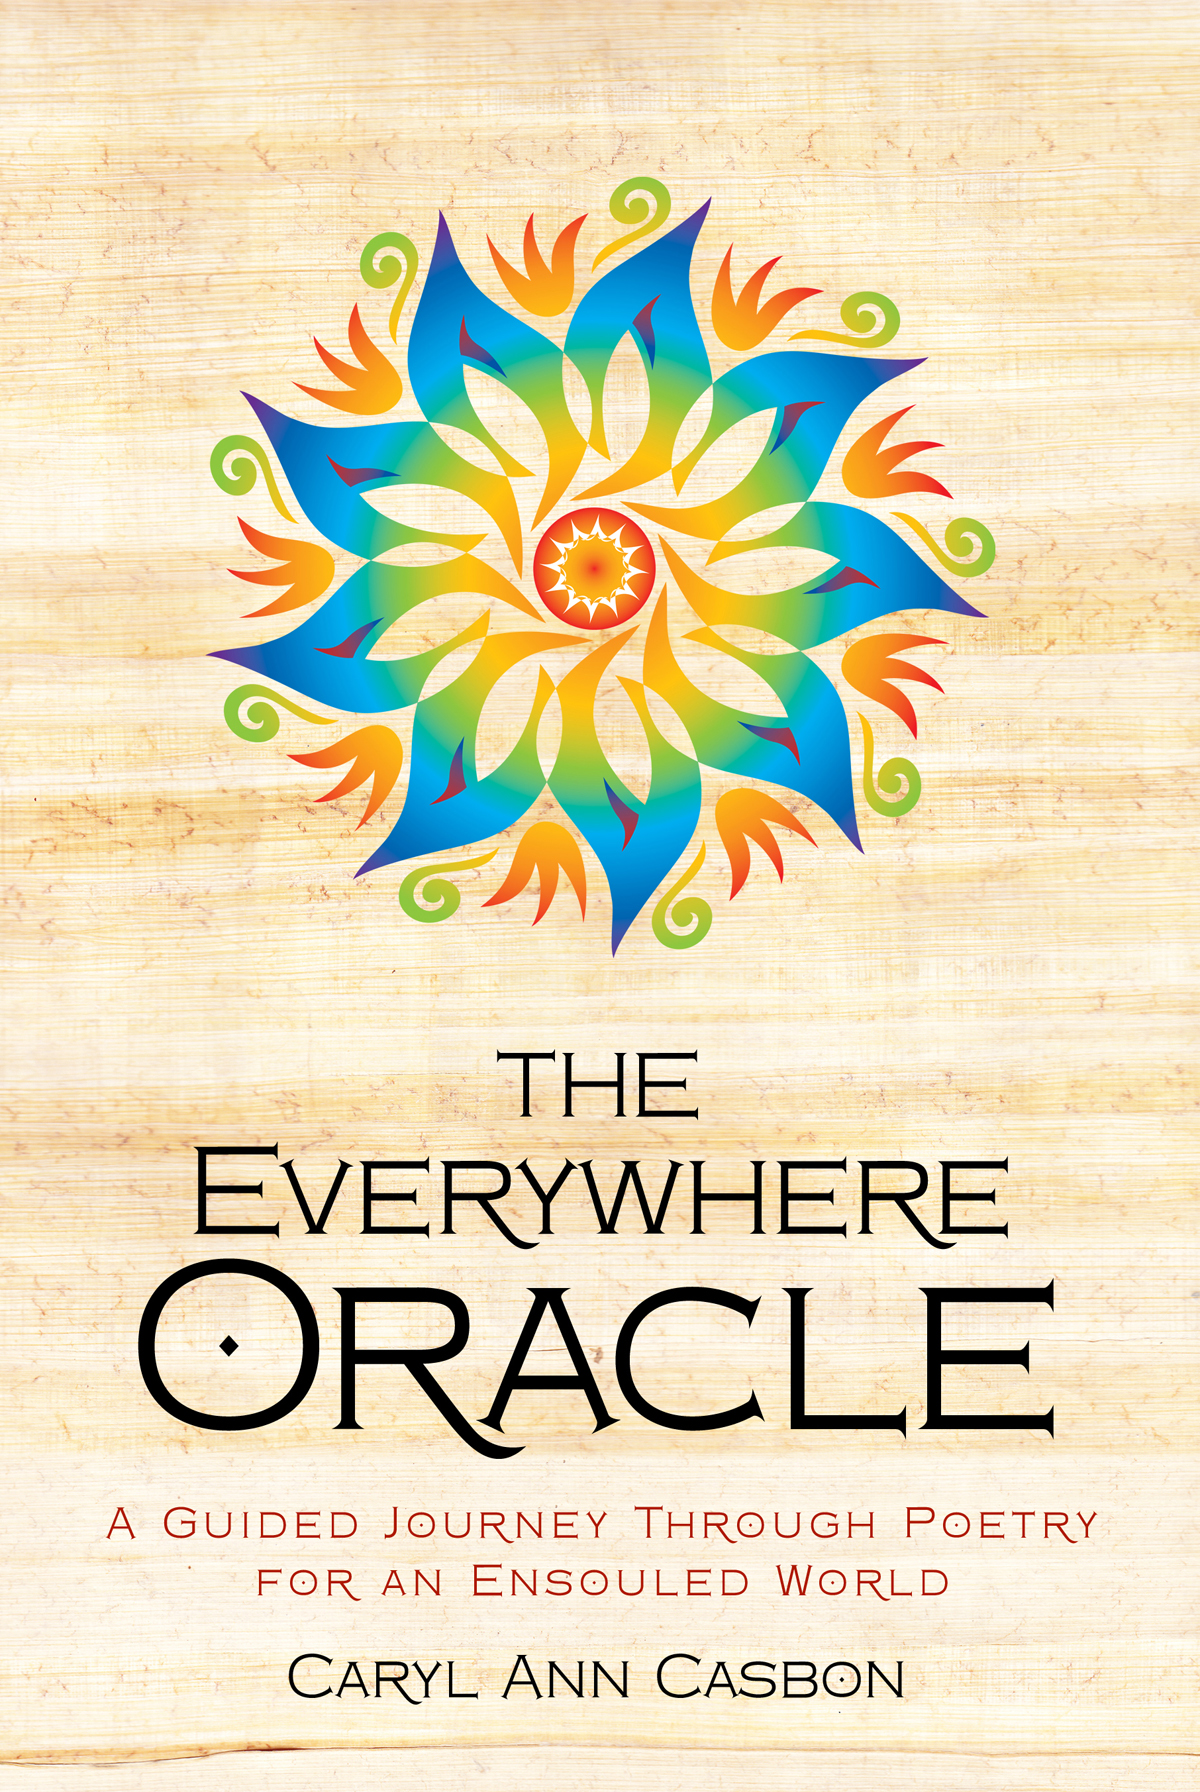 The Everywhere Oracle: A Guided Journey Through Poetry for an Ensouled World by Caryl Ann Casbon